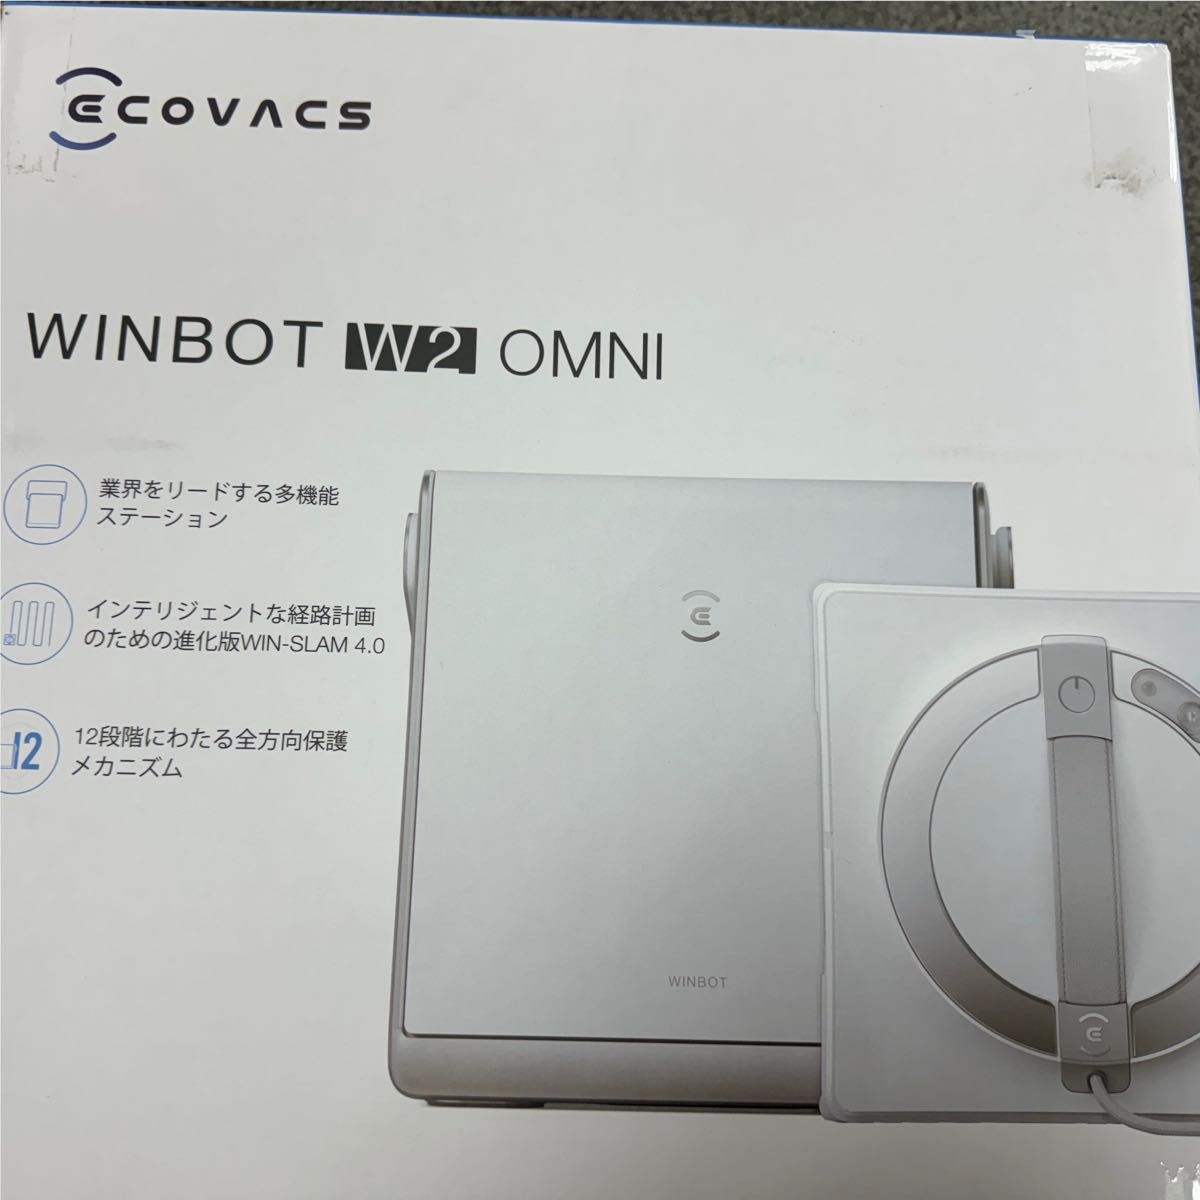 ECOVACSWINBOT W2 OMNI 窓掃除 窓拭きロボット ロボット